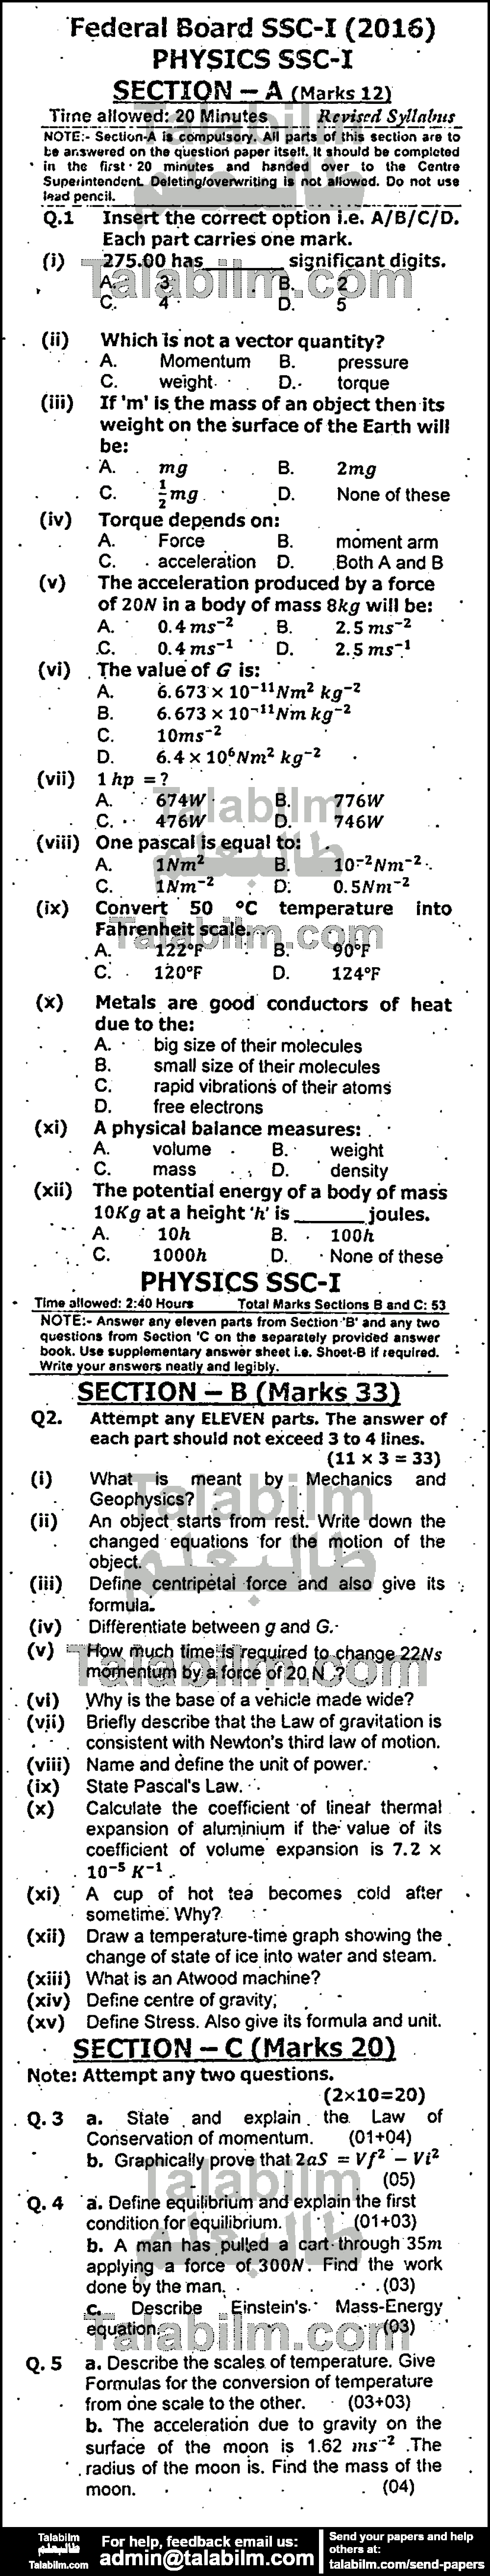 Physics 0 past paper for 2016 Group-I